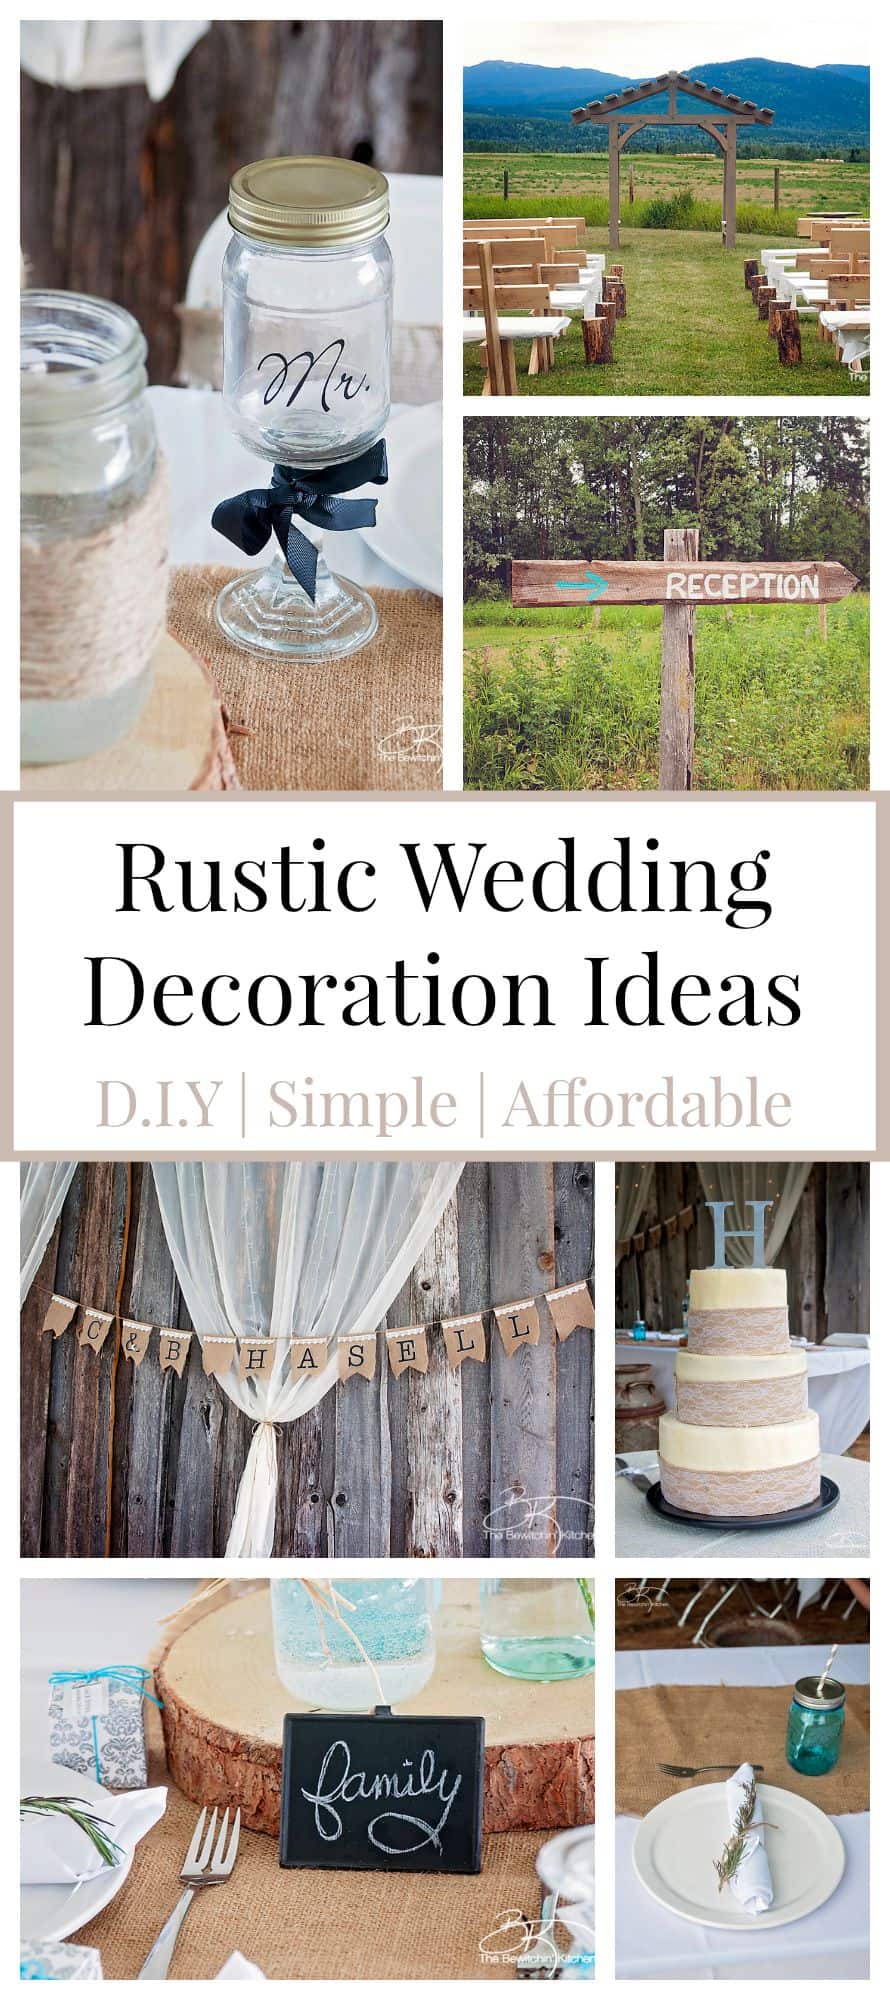 Rustic Wedding Ideas That Are Diy Affordable The Bewitchin